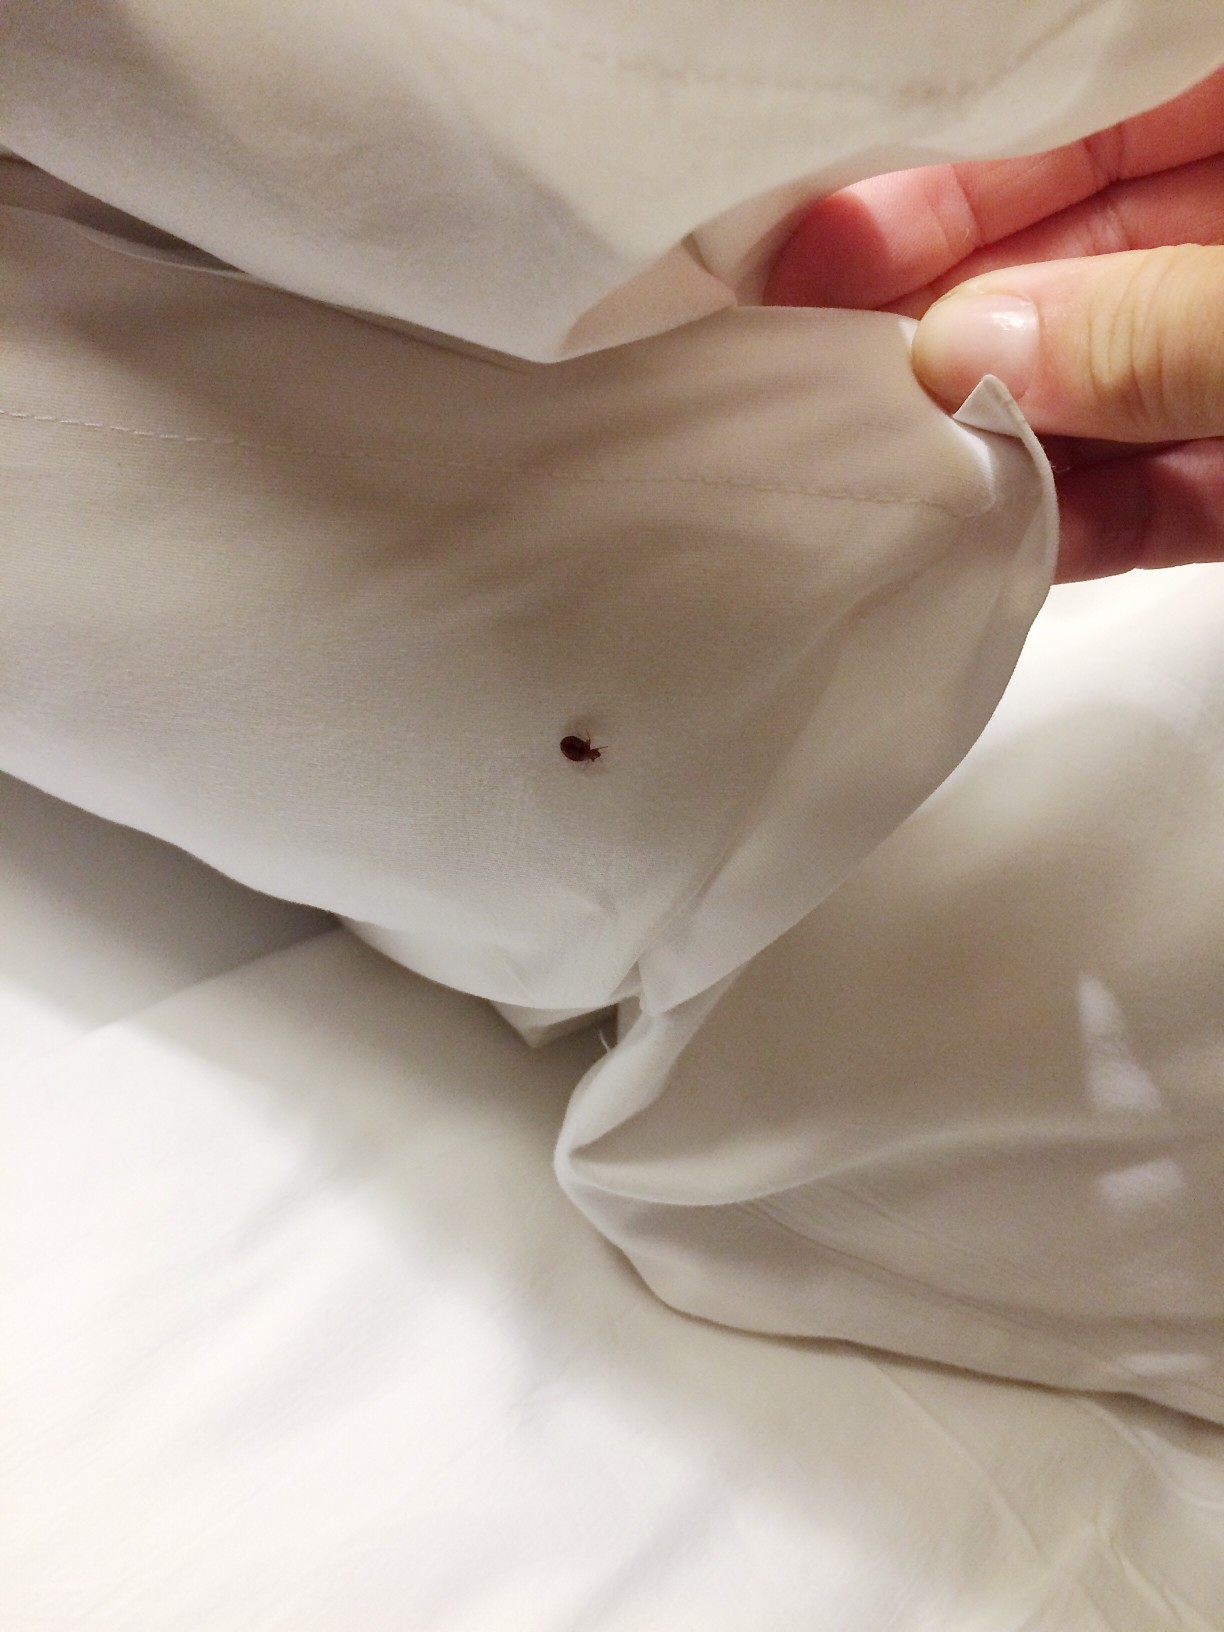 a bed bug found under the blanket